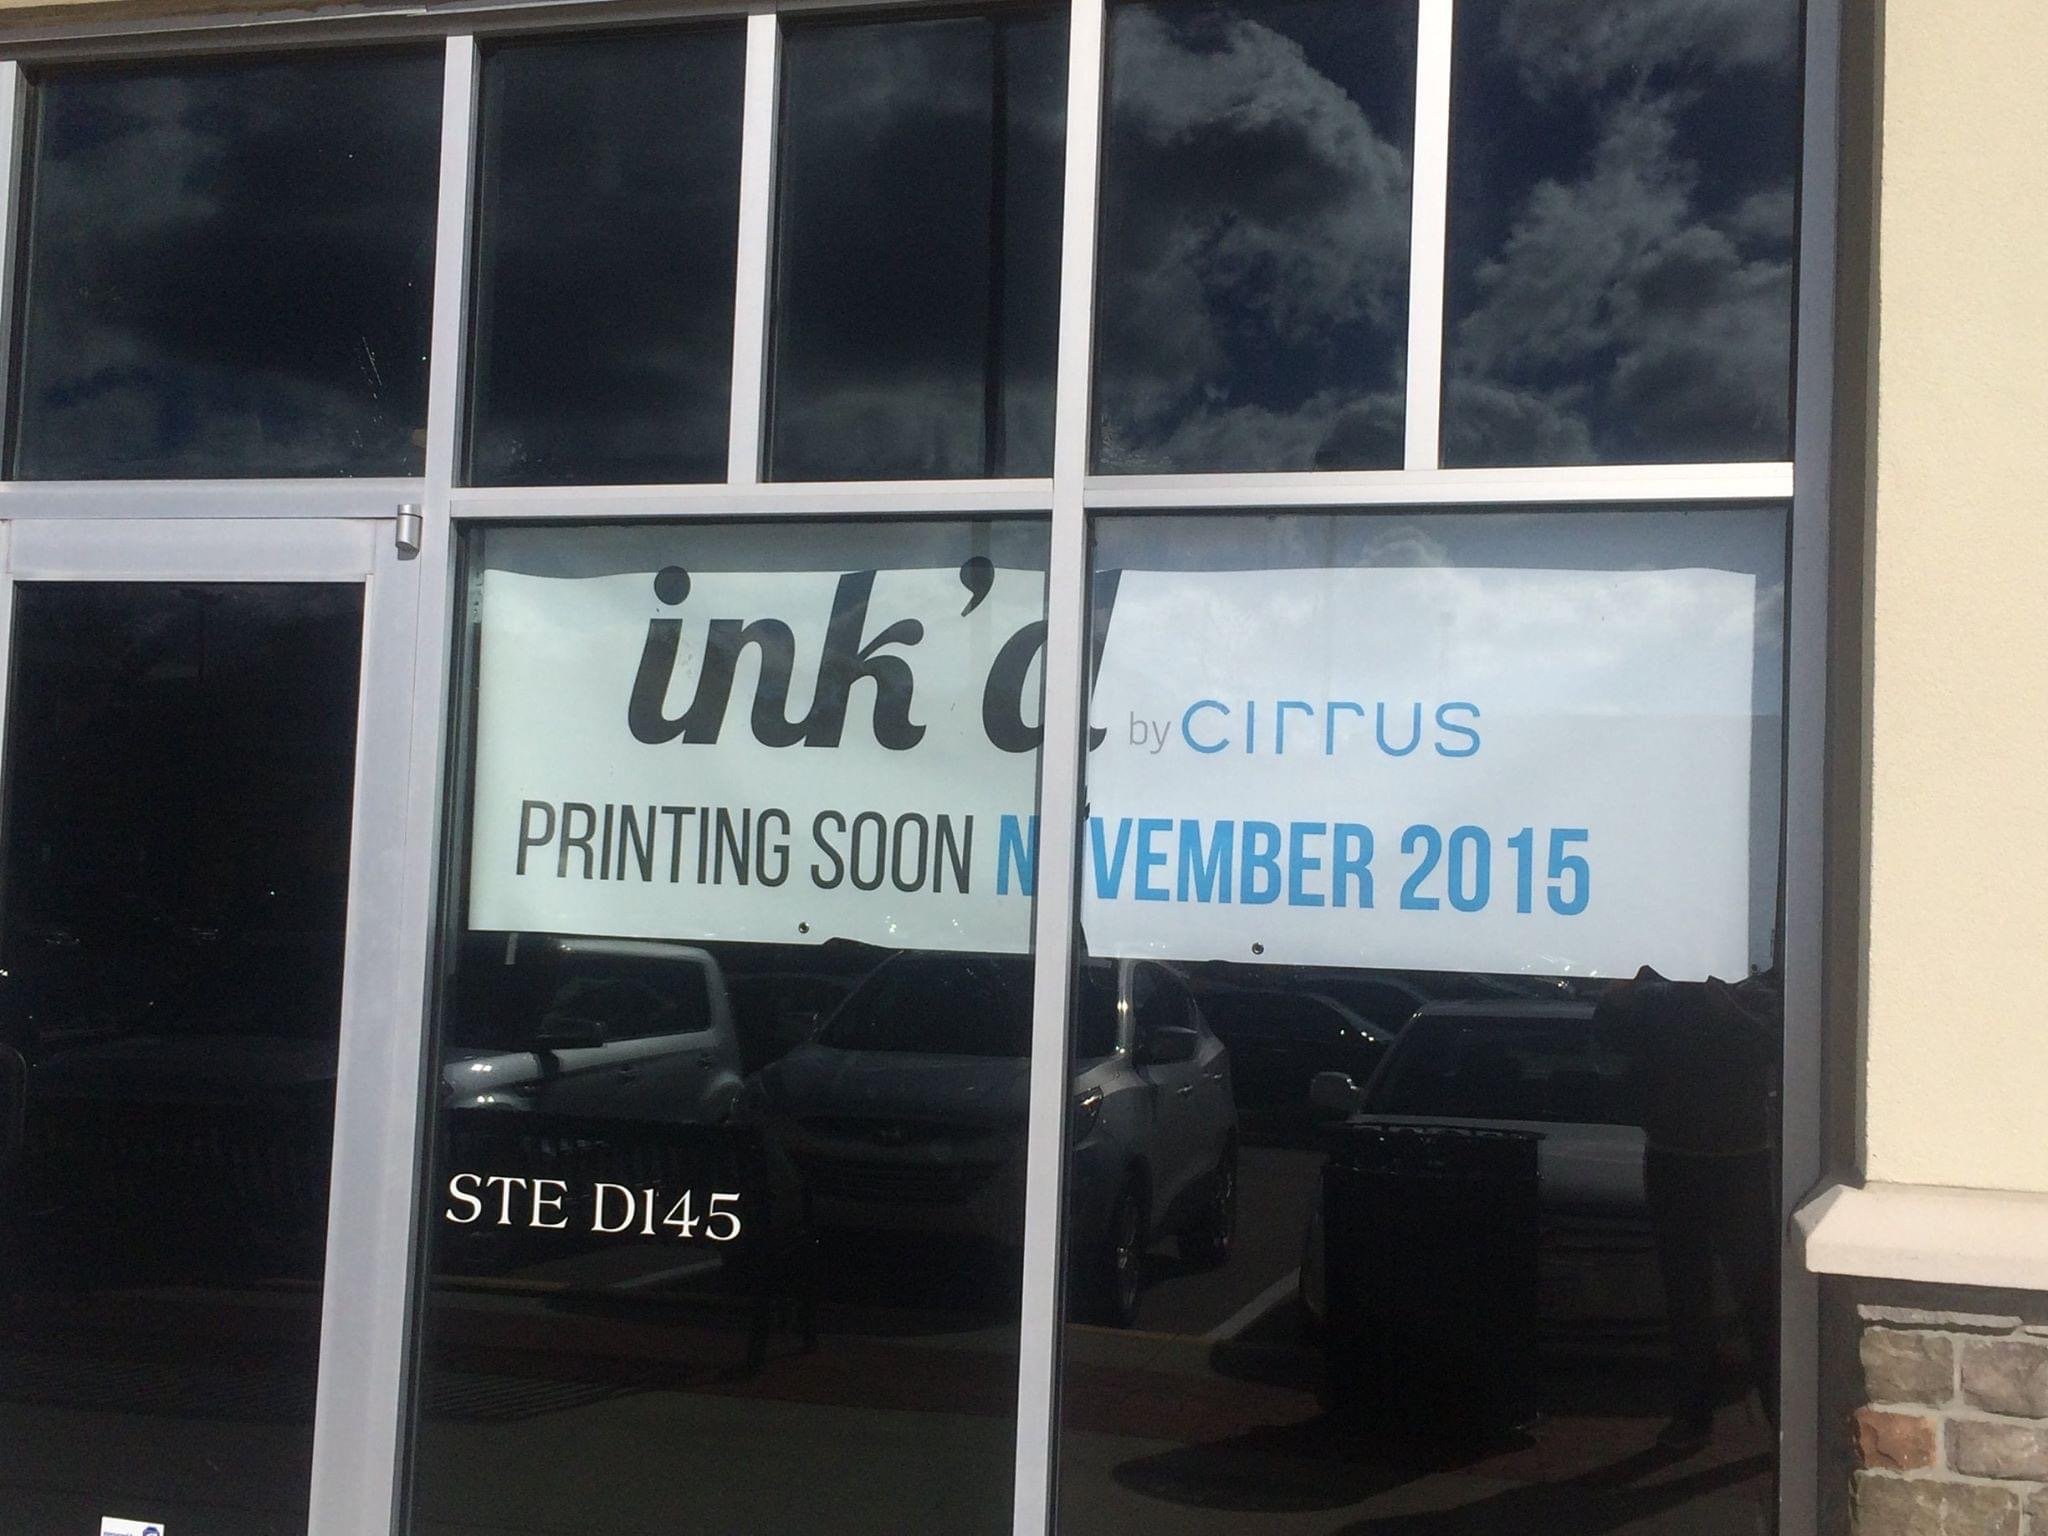 The early Ink'd storefront - pre-opening